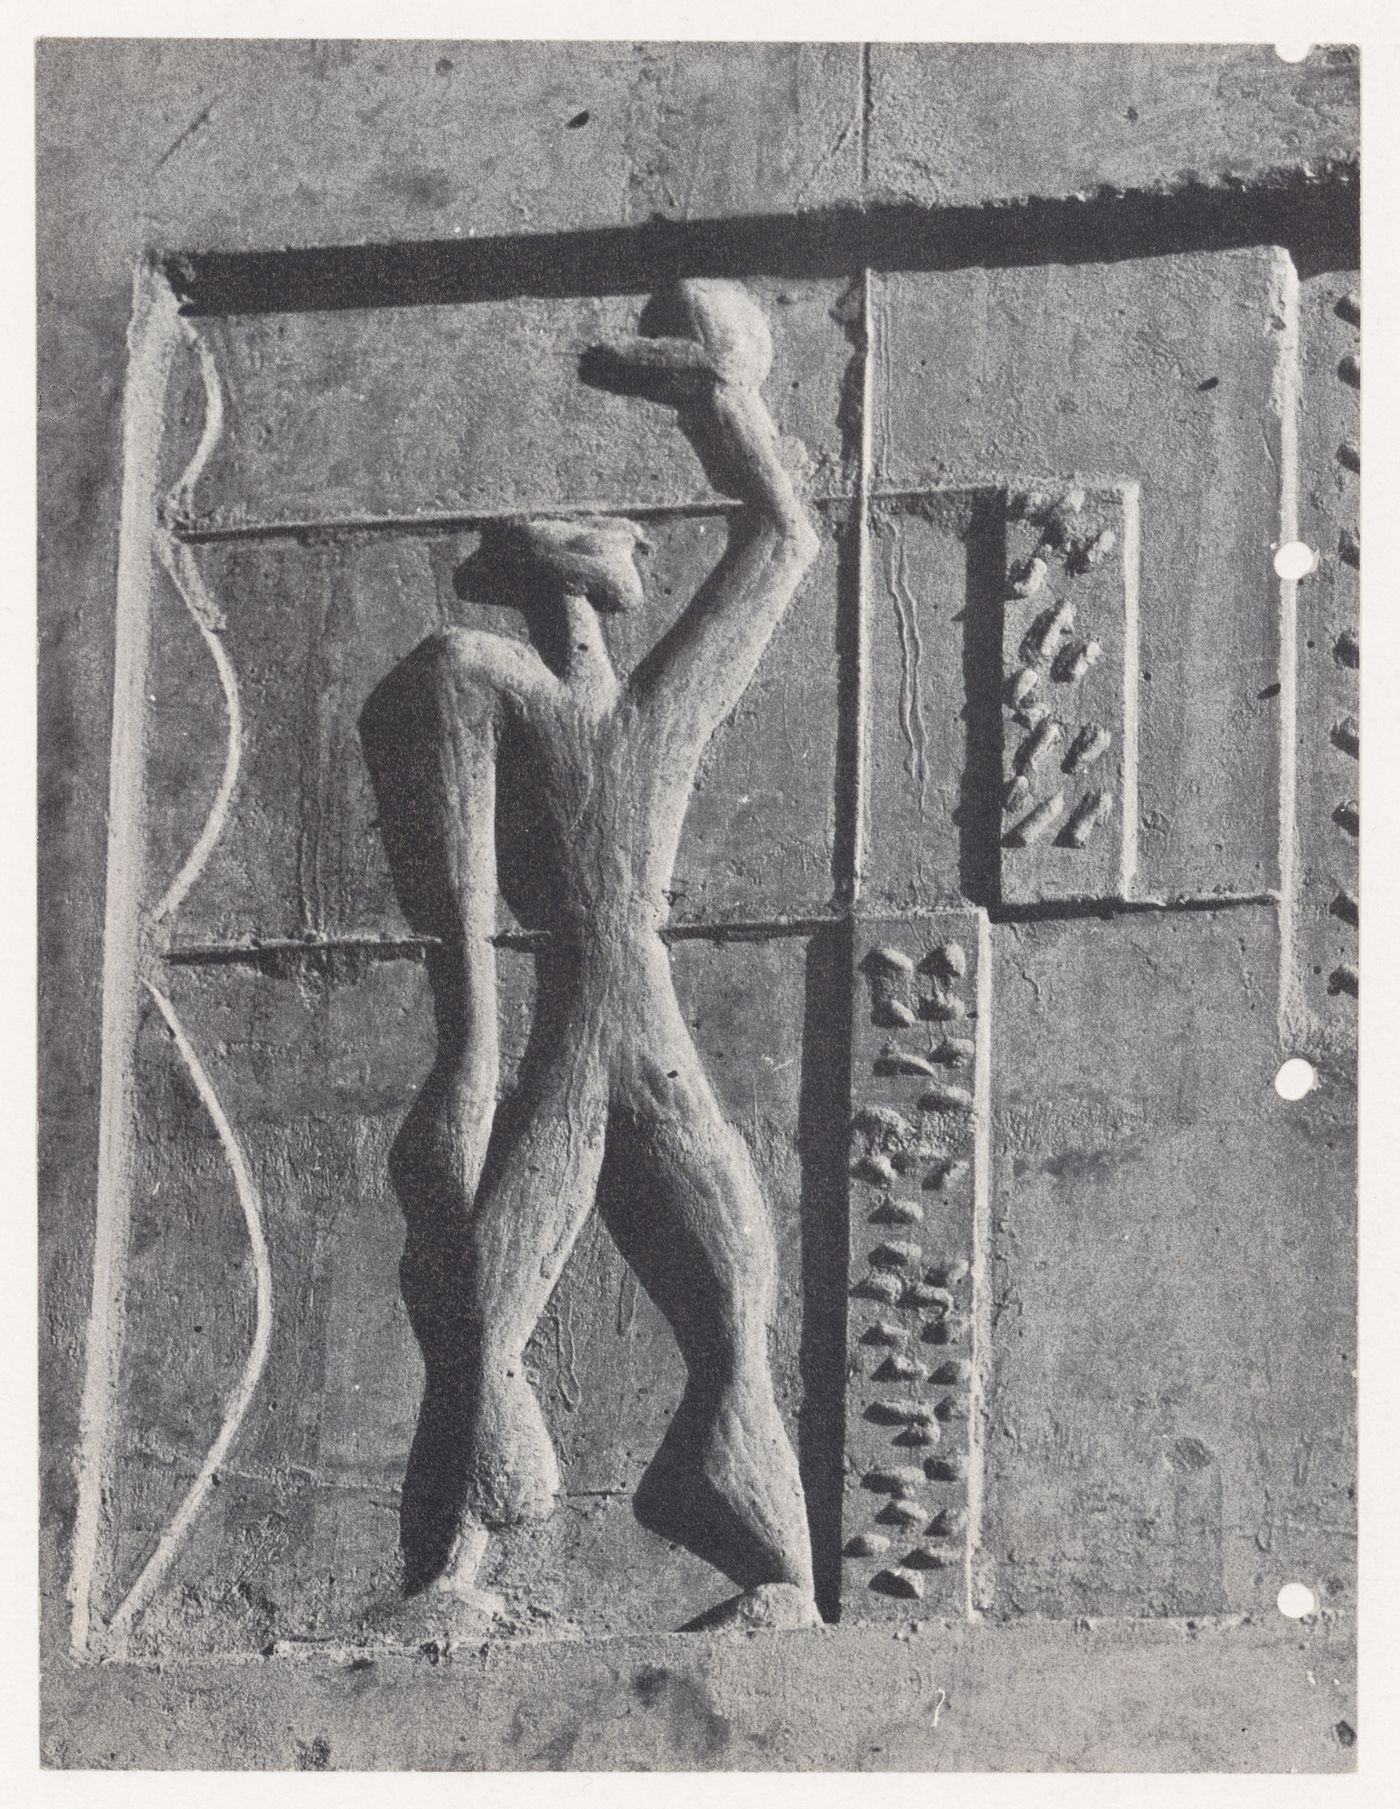 View of a bas-relief of the Modulor man sign by Le Corbusier, Chandigarh, India